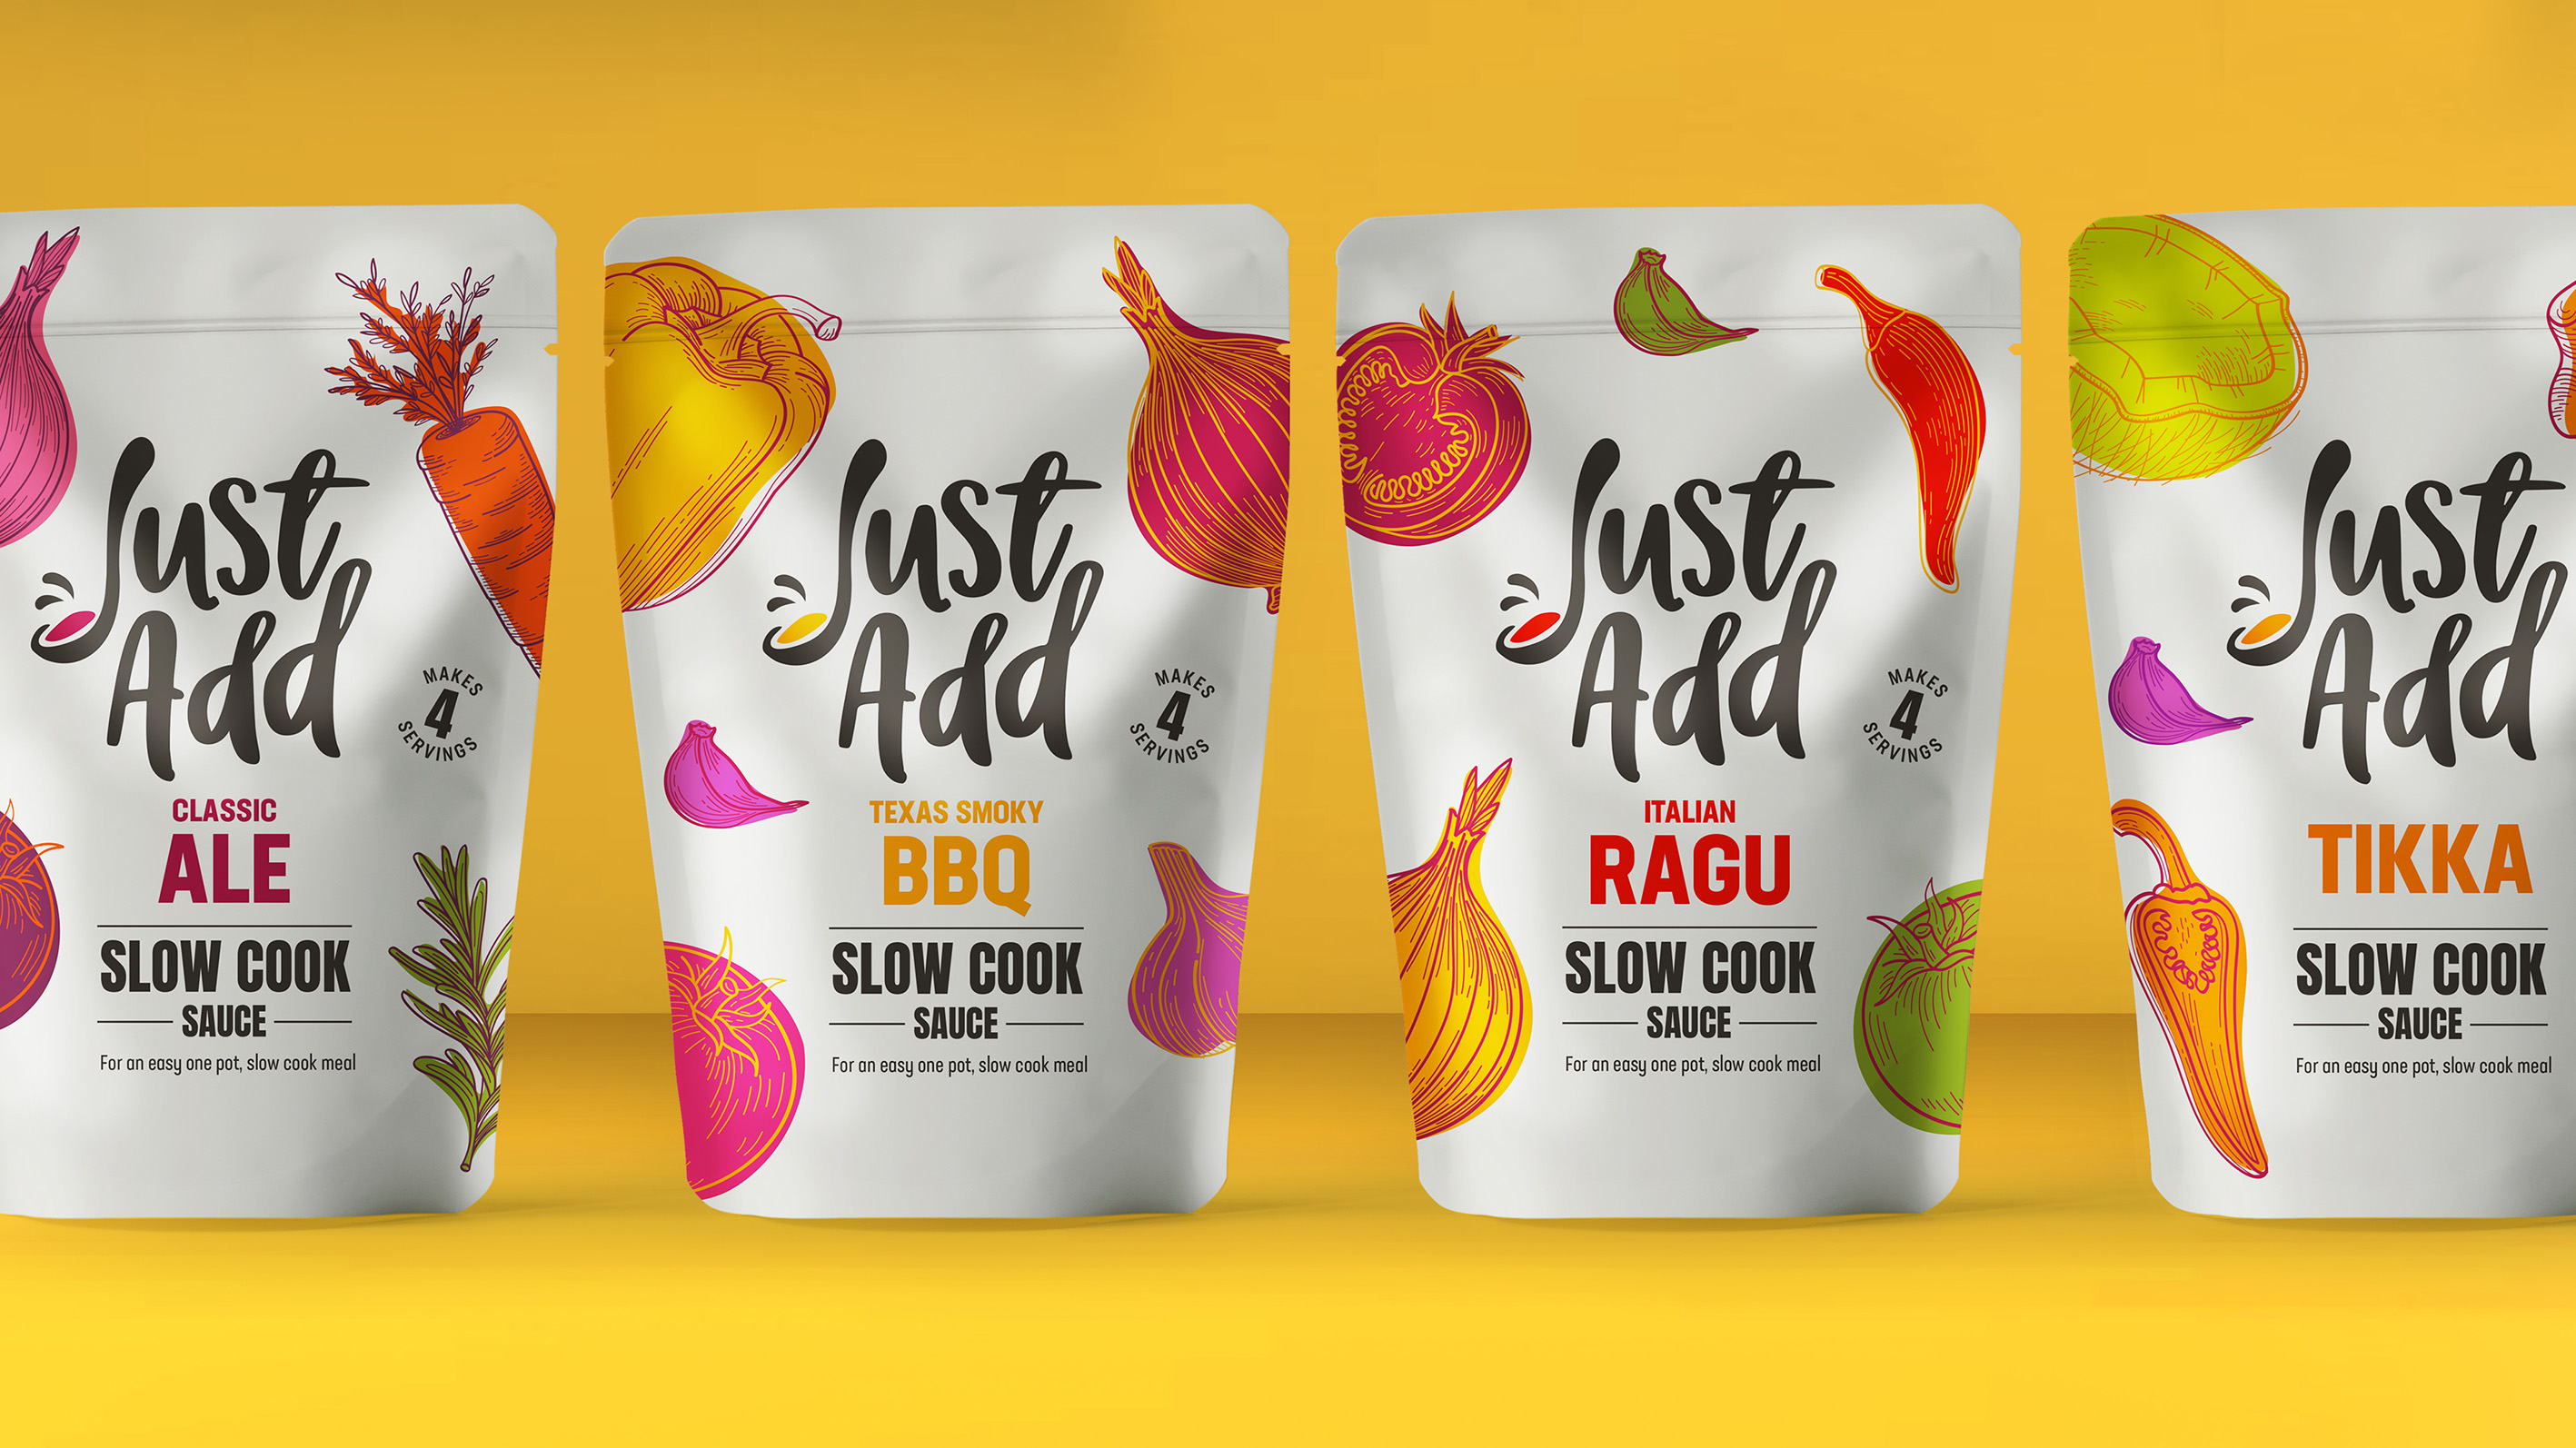 Just Add Slow Cooking Sauces Branding and Packaging Design